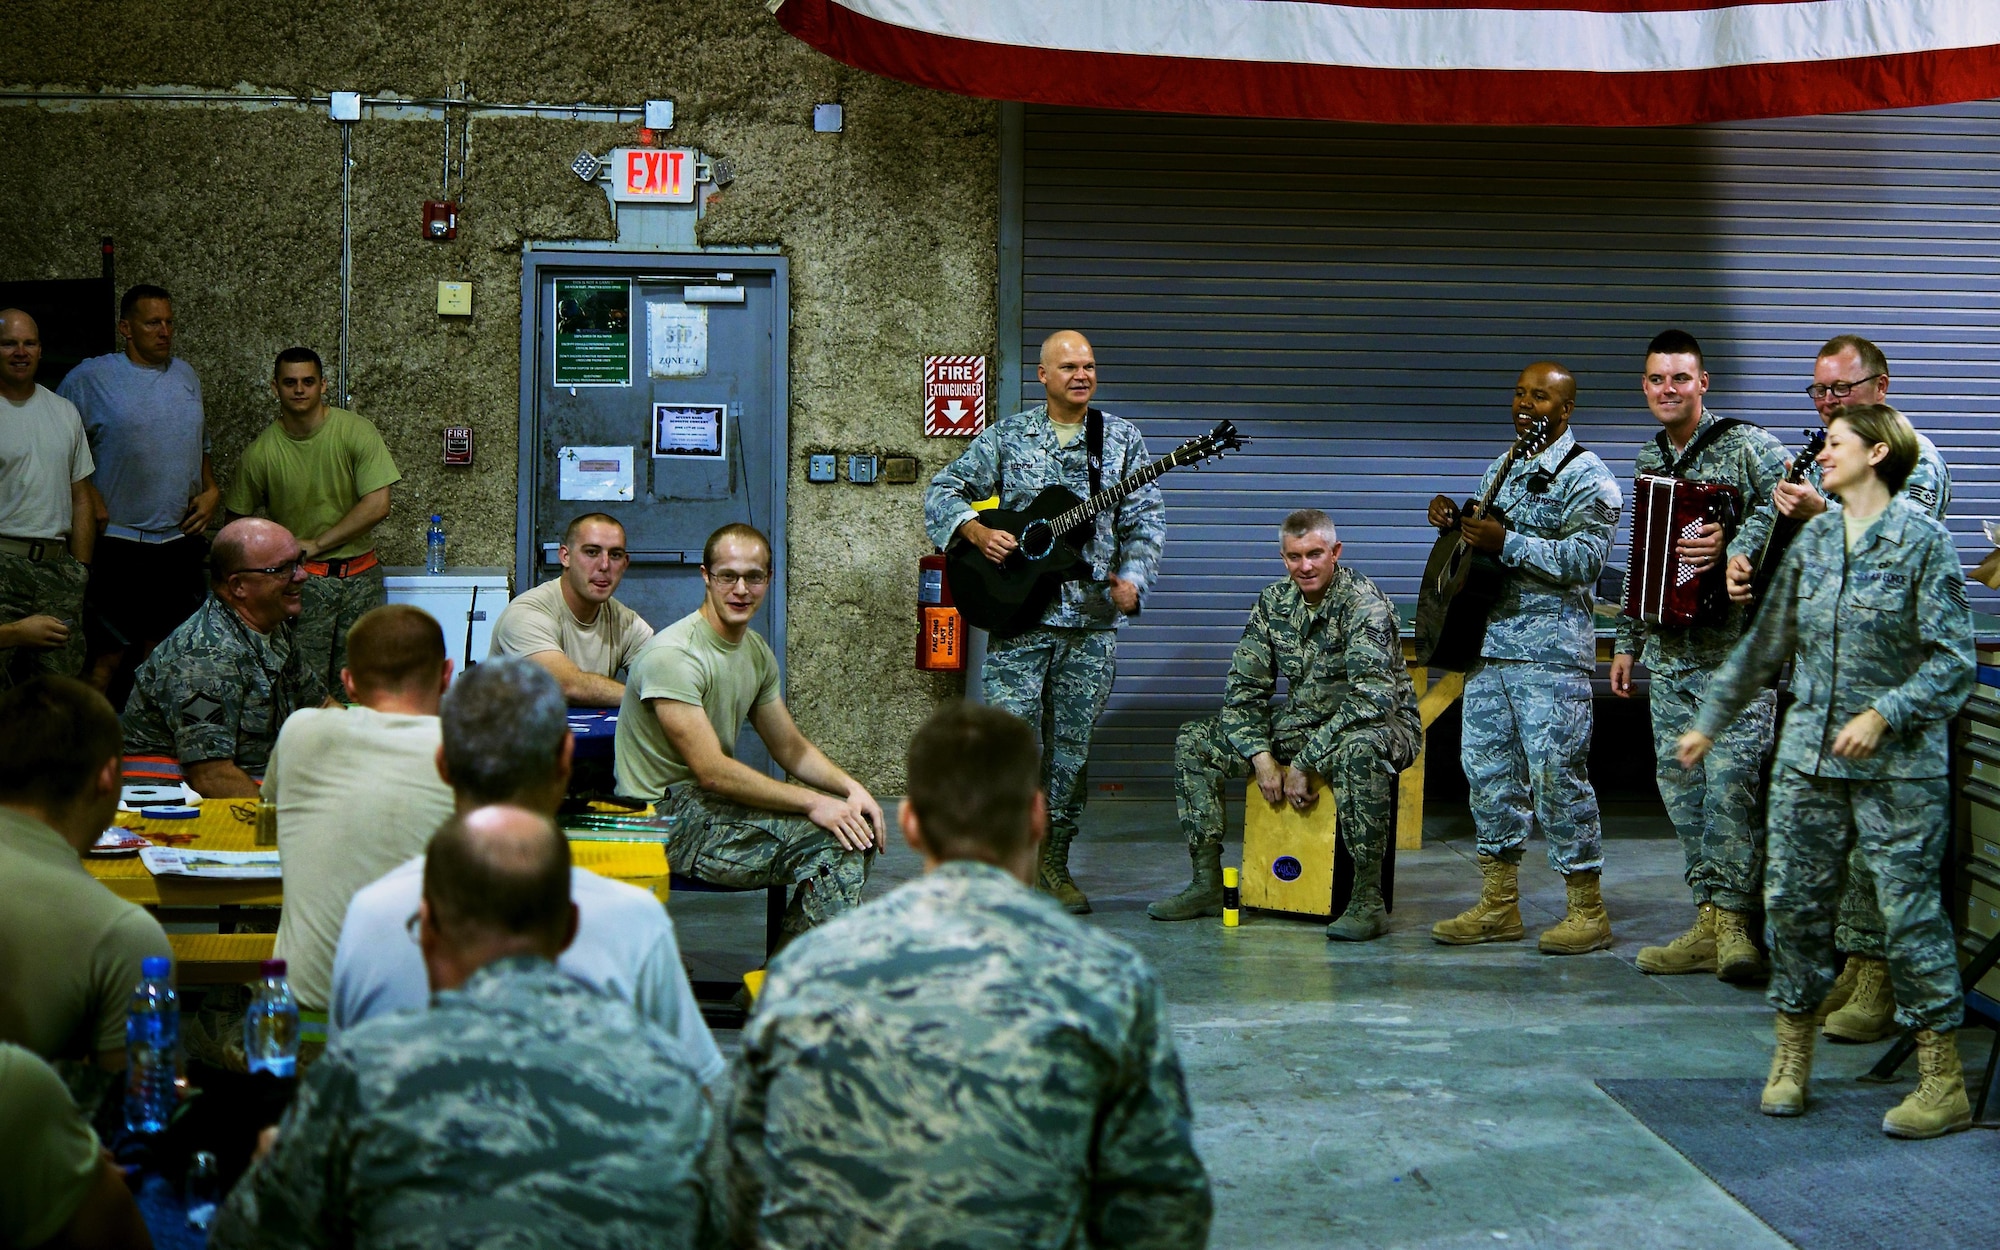 The U.S. Air Forces Central Command band plays music for service members during a performance at Al Udeid Air Base, Qatar, June 17, 2015. The band visited workstations to perform and boost Airmen’s morale. (U.S. Air Force photo/Airman 1st Class Nathan Martin)